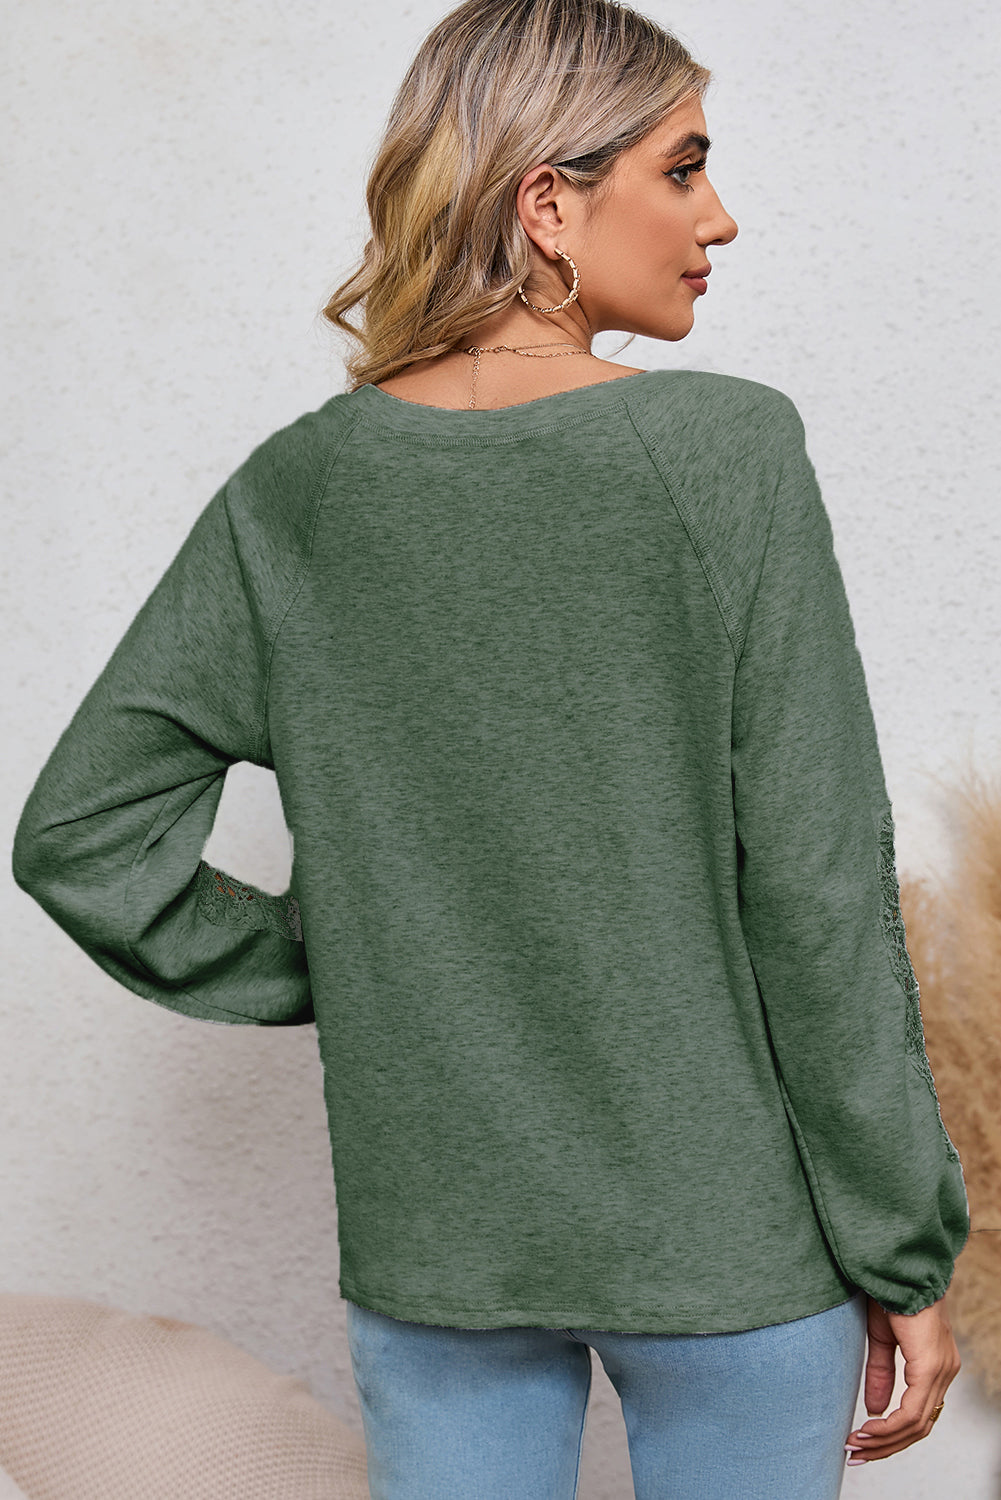 Green V-Neck Embroidered Long Sleeve Top